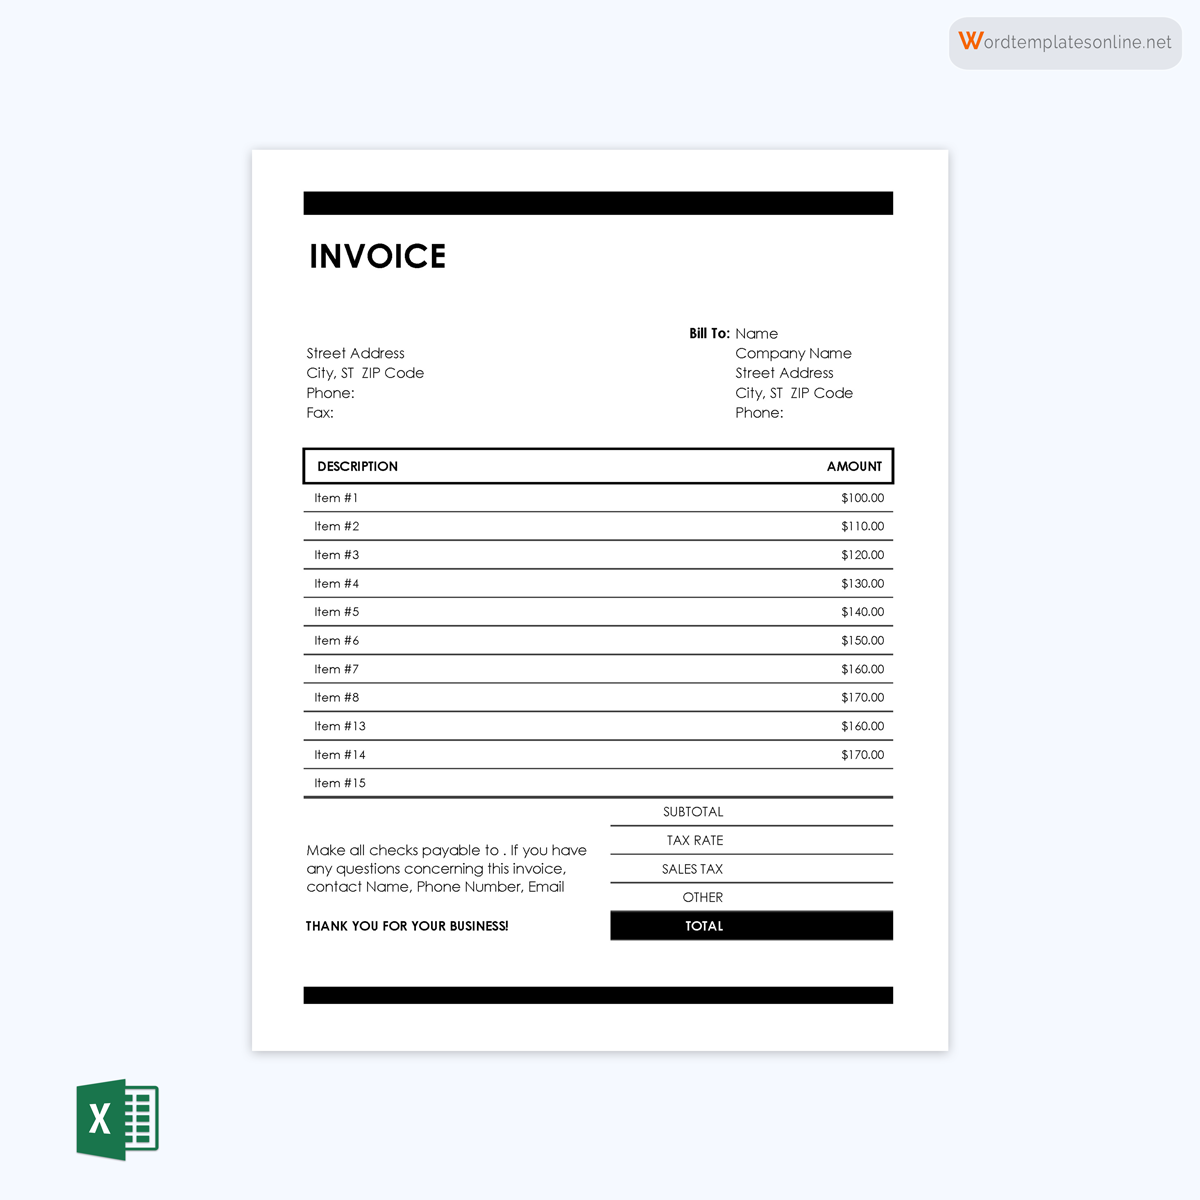 Free invoice templates with customizable options